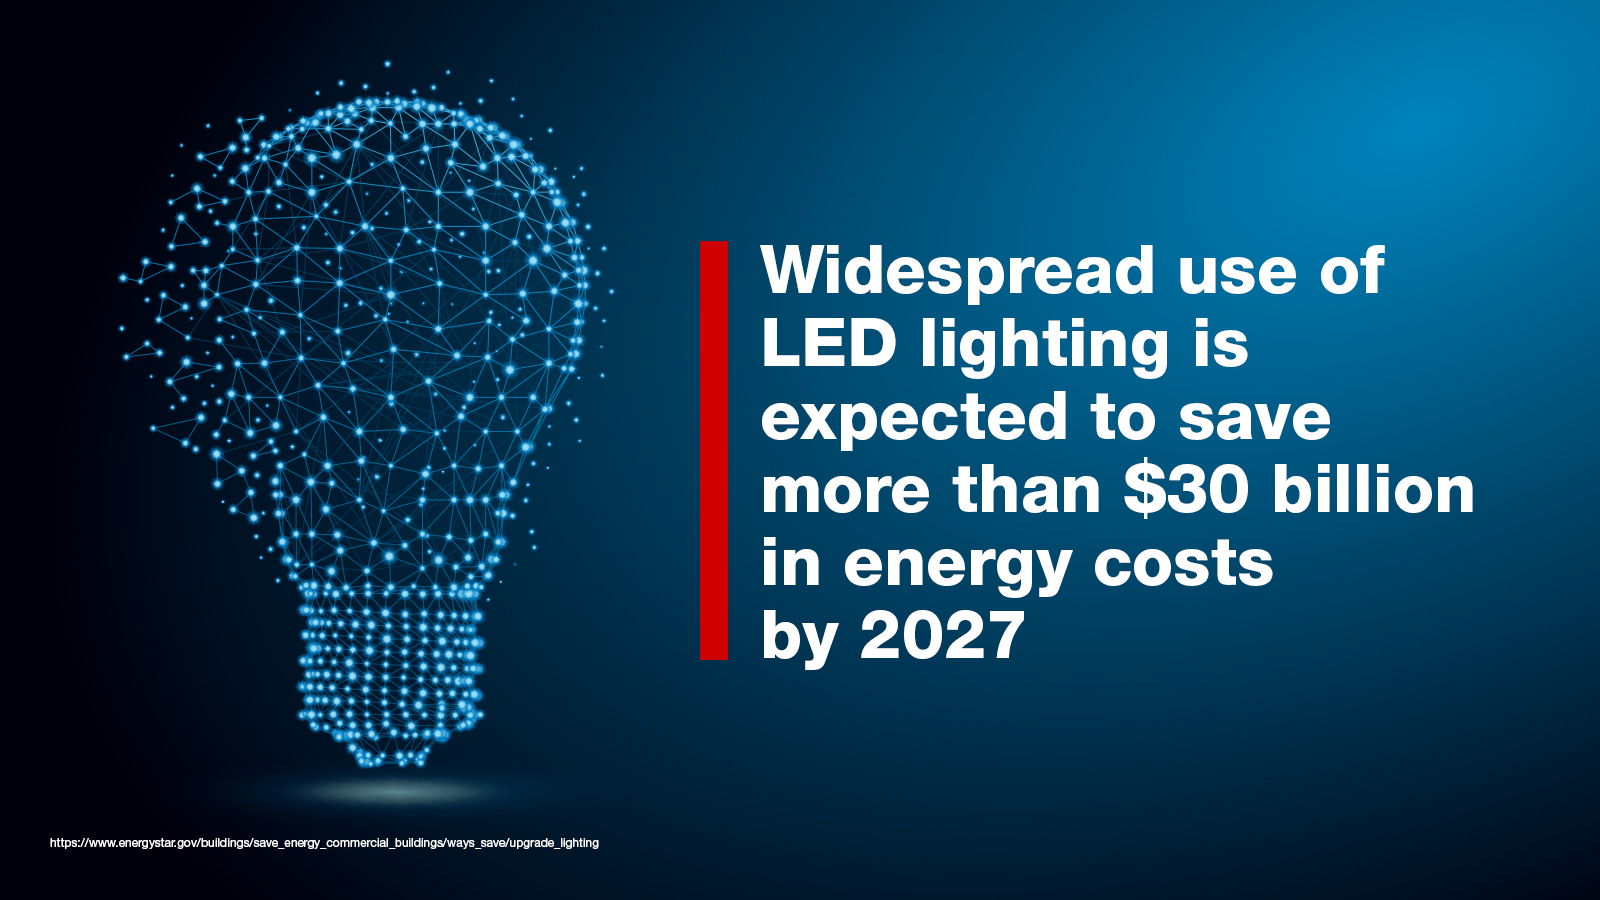 Widespread use of LED lighting is expected to save more than $30 billion by 2027